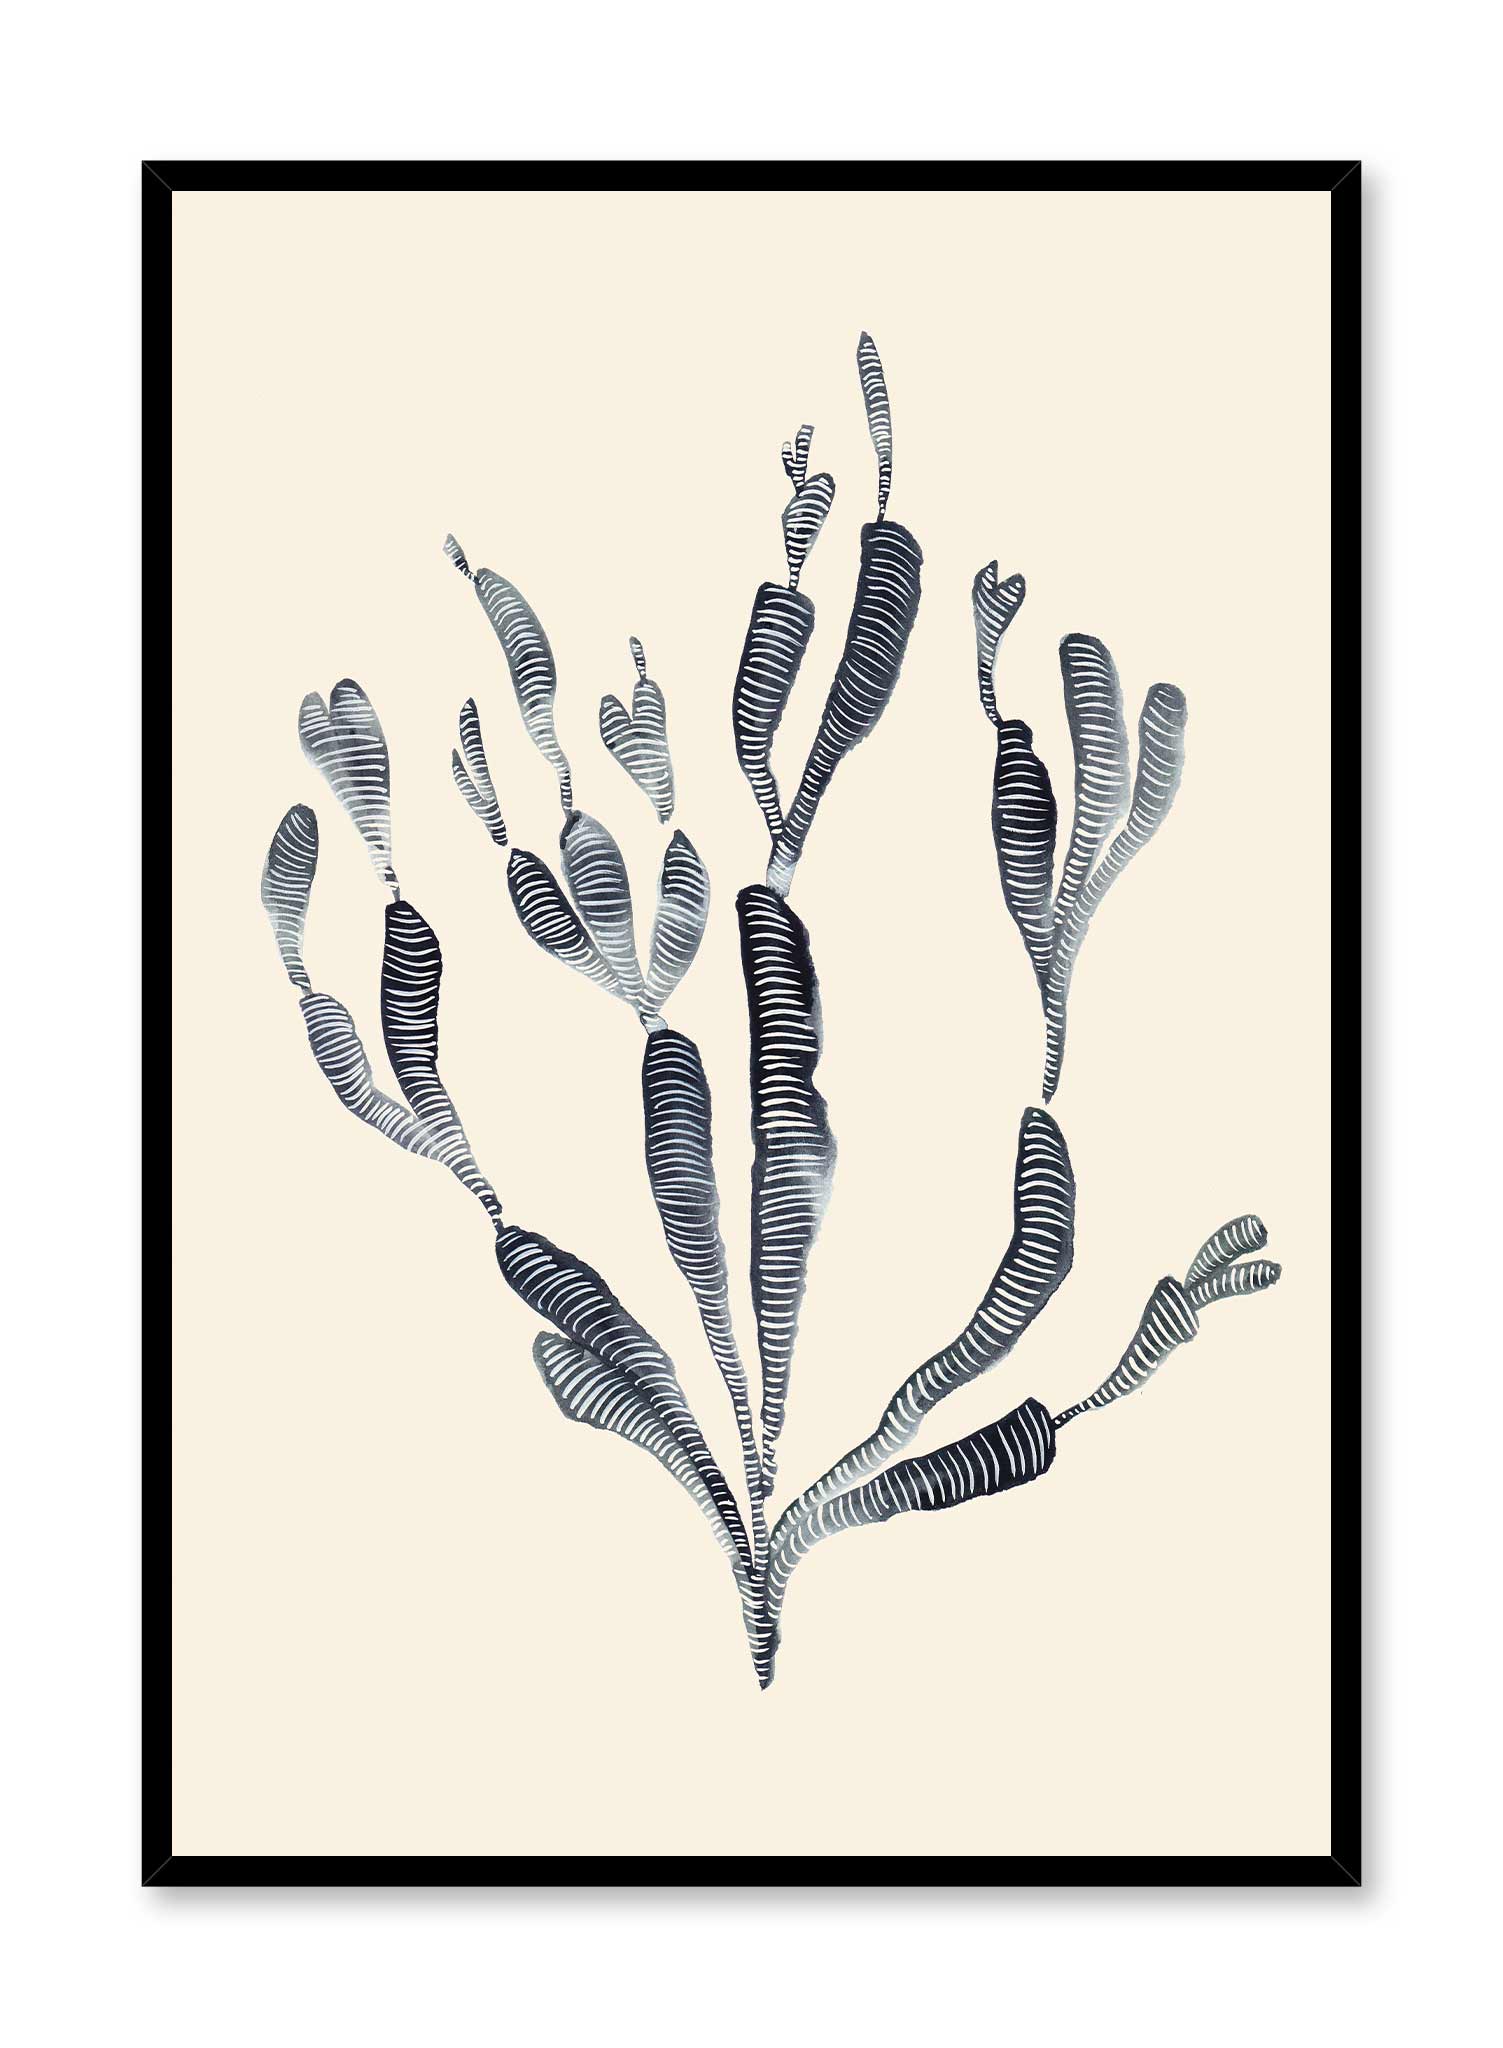 Acropora is a minimalist illustration black striped branch of coral by Opposite Wall.